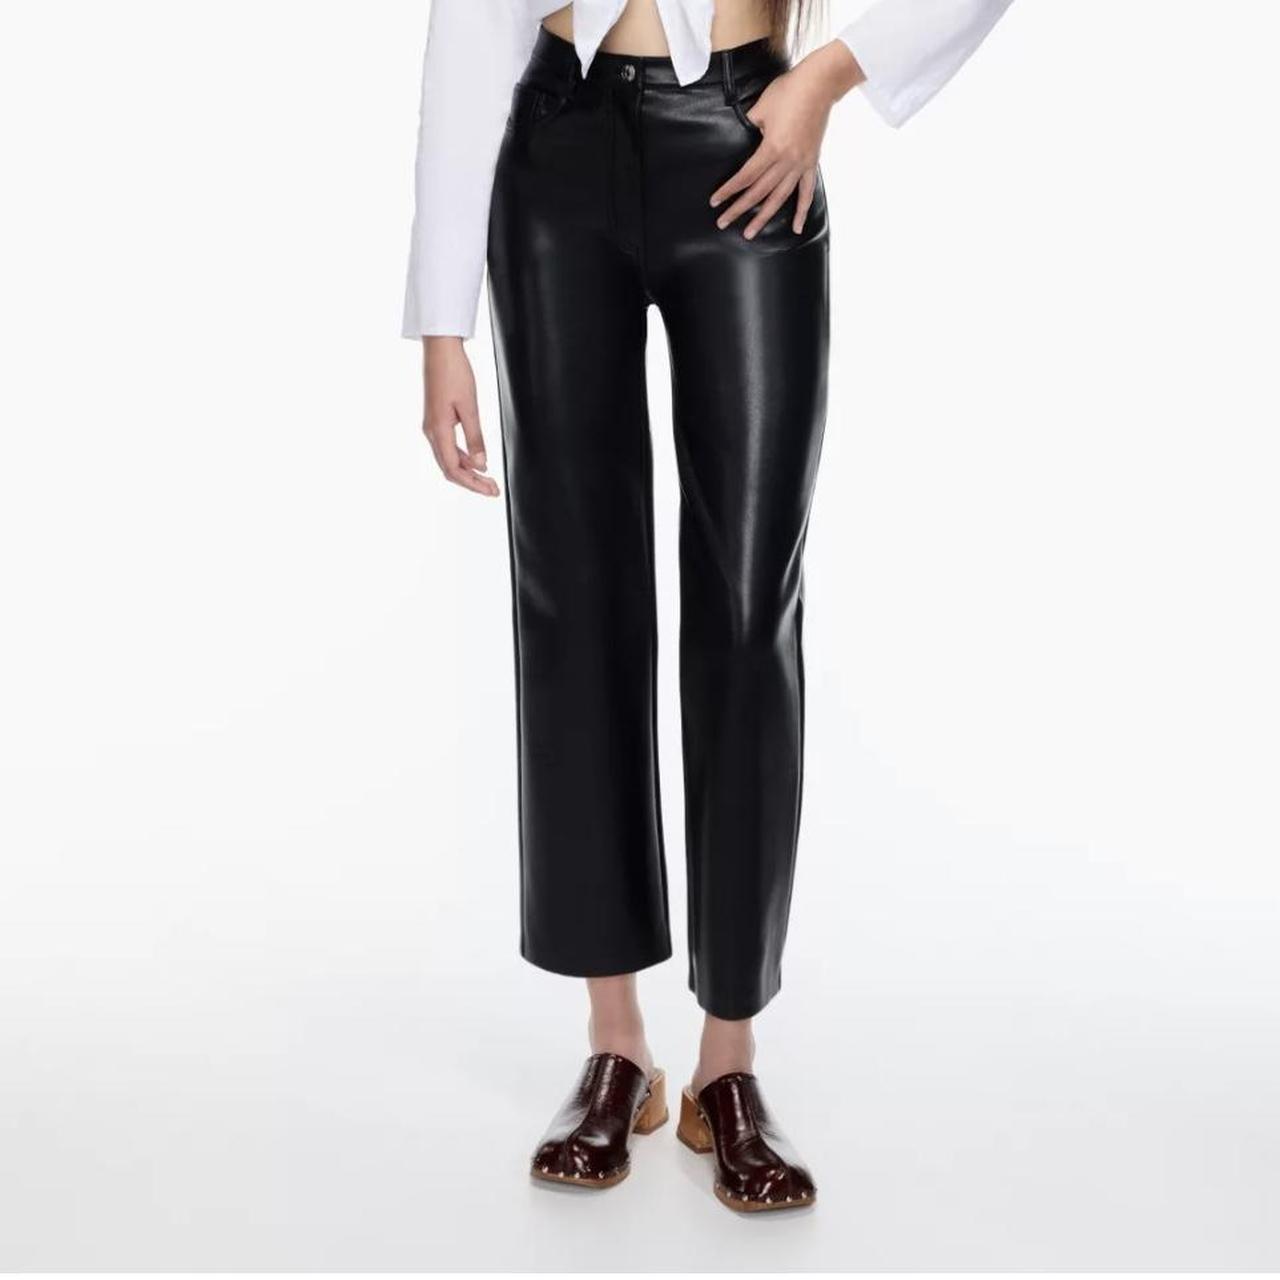 THE MELINA™ CROPPED PANT